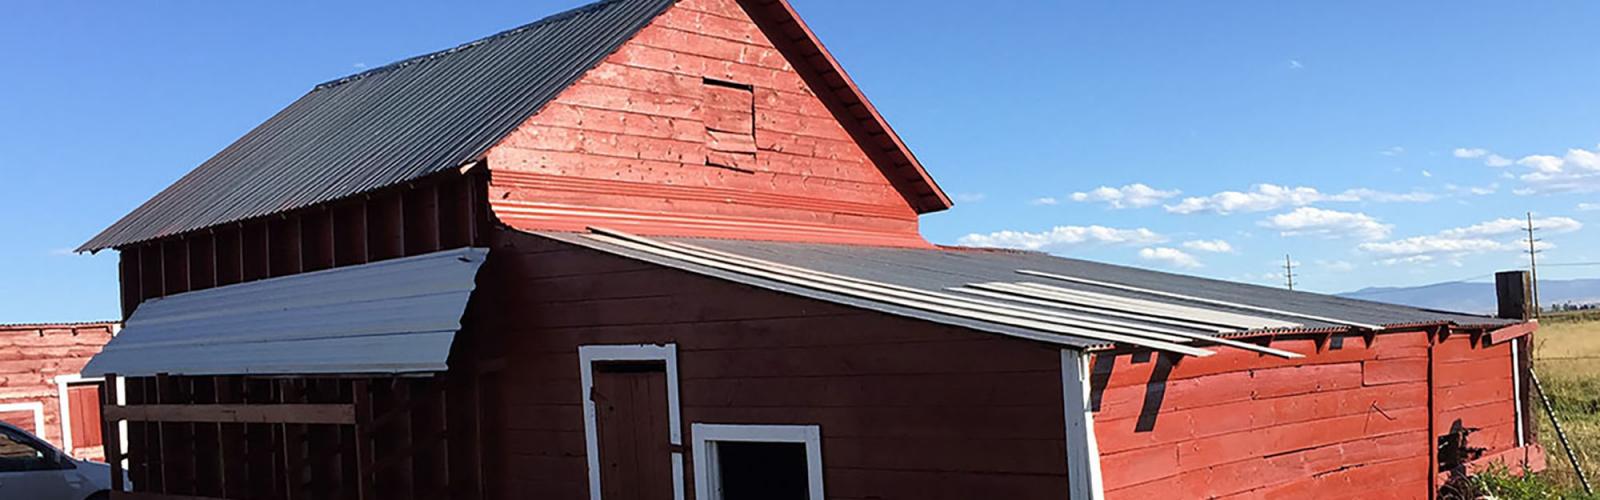 Exterior Painting for farm buildings